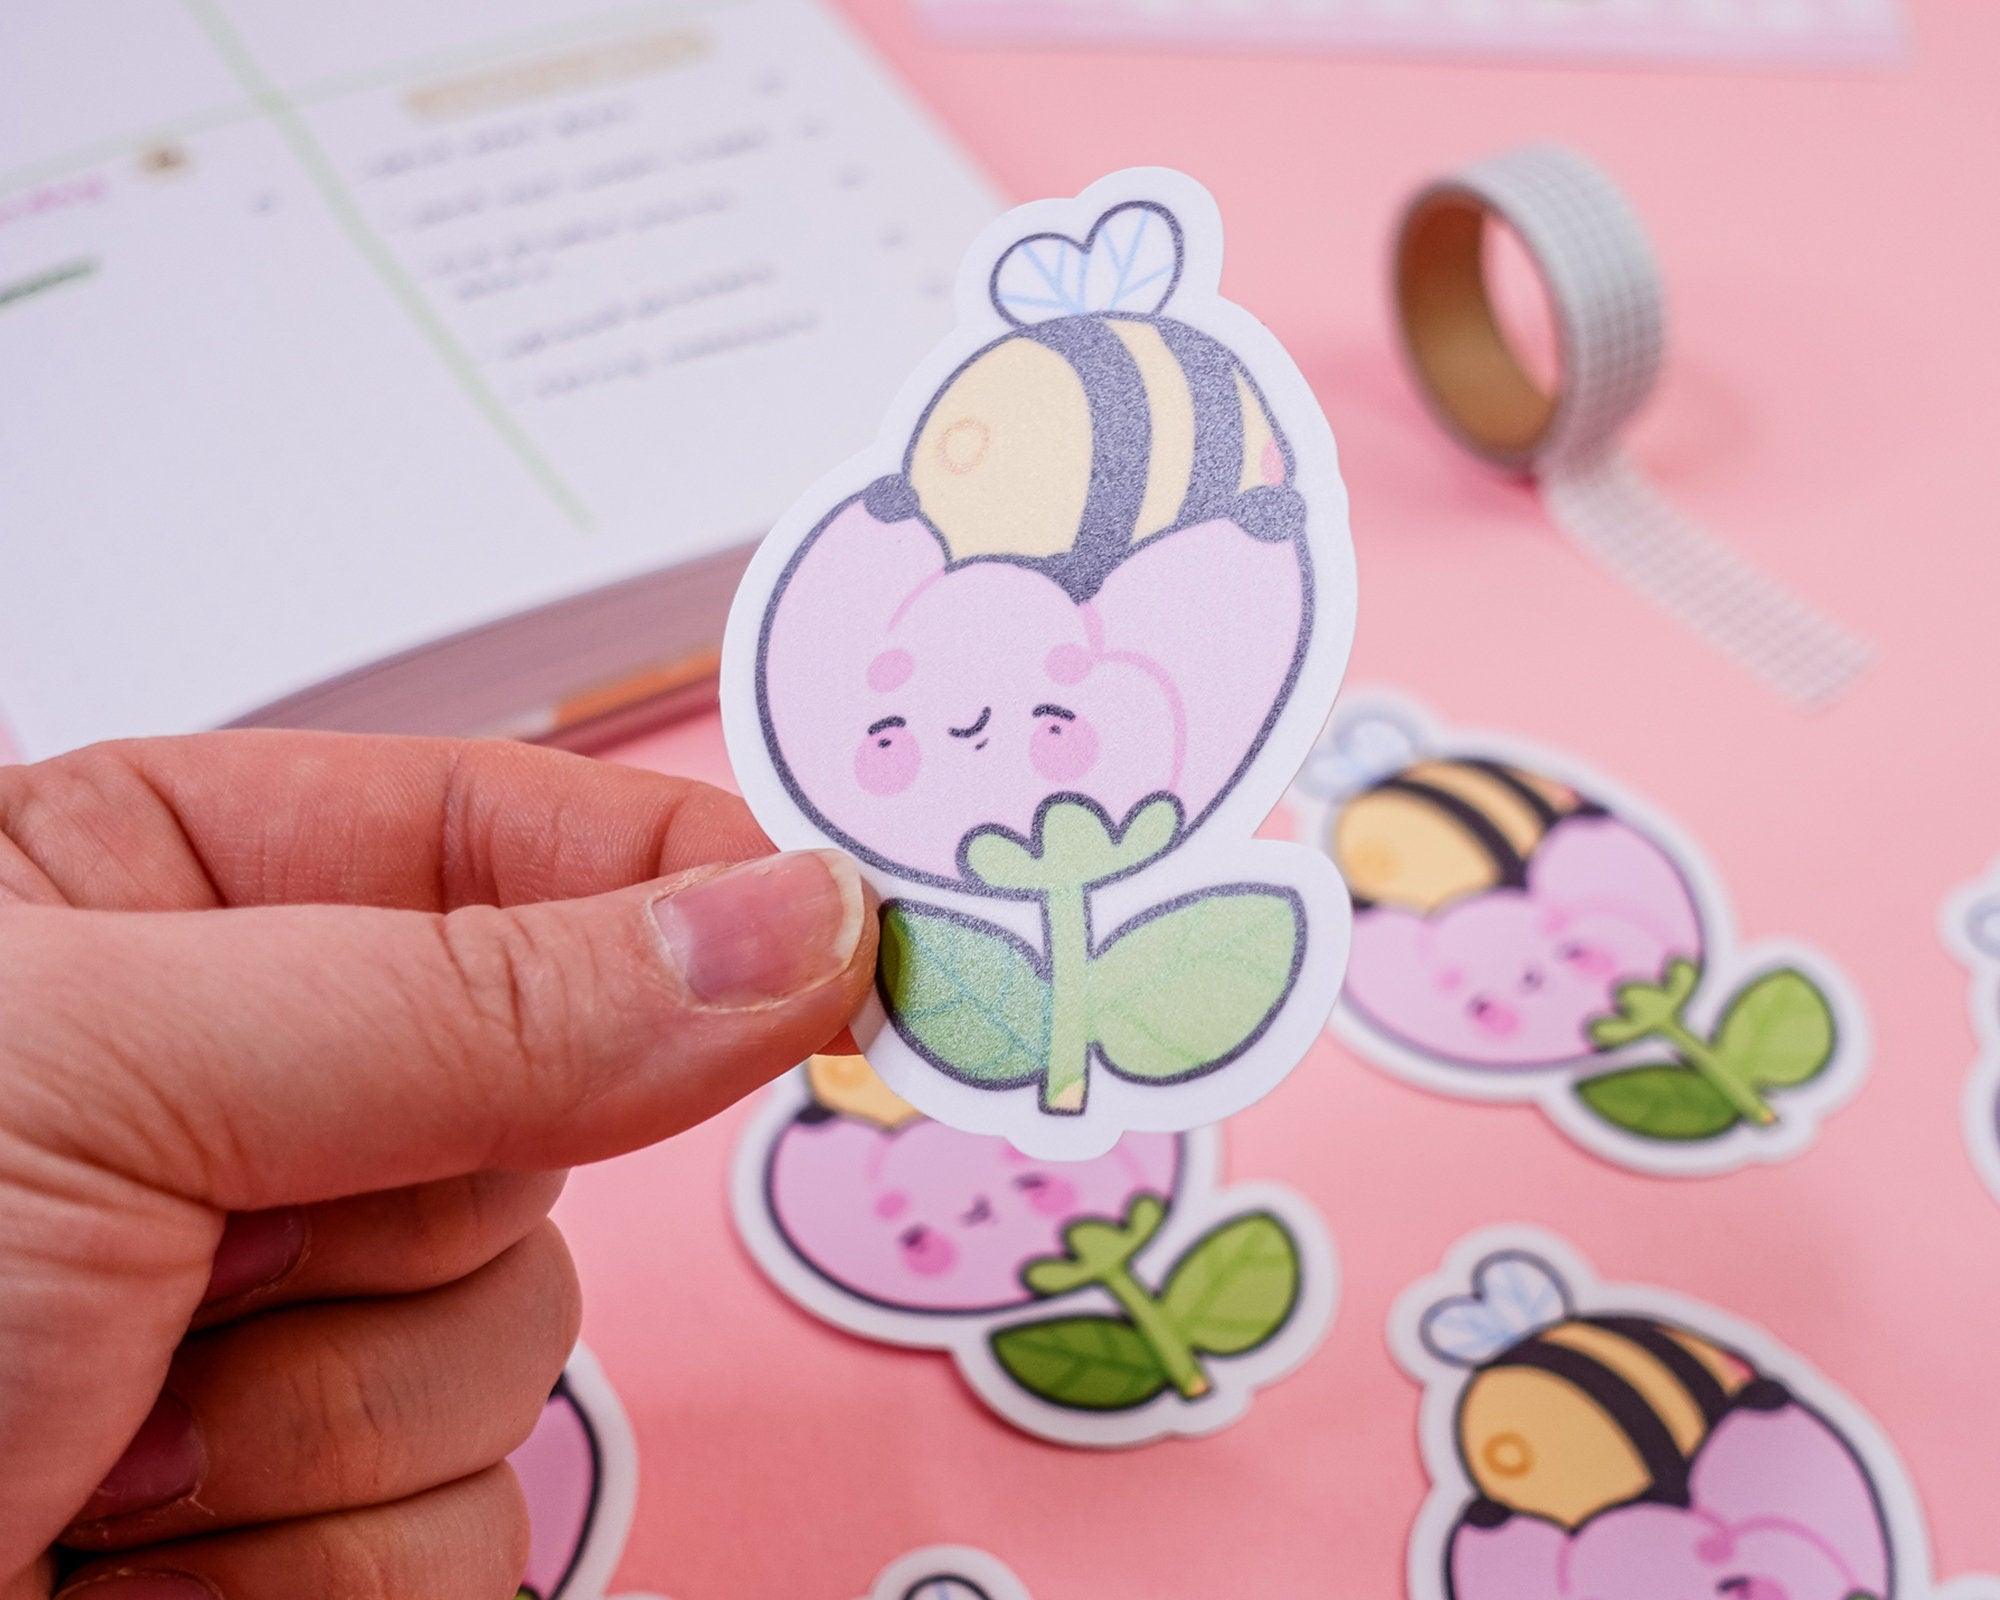 Sleepy Bumblebutt peony sticker, handmade and illustrated, perfect for planners, laptops, and scrapbooks. 2